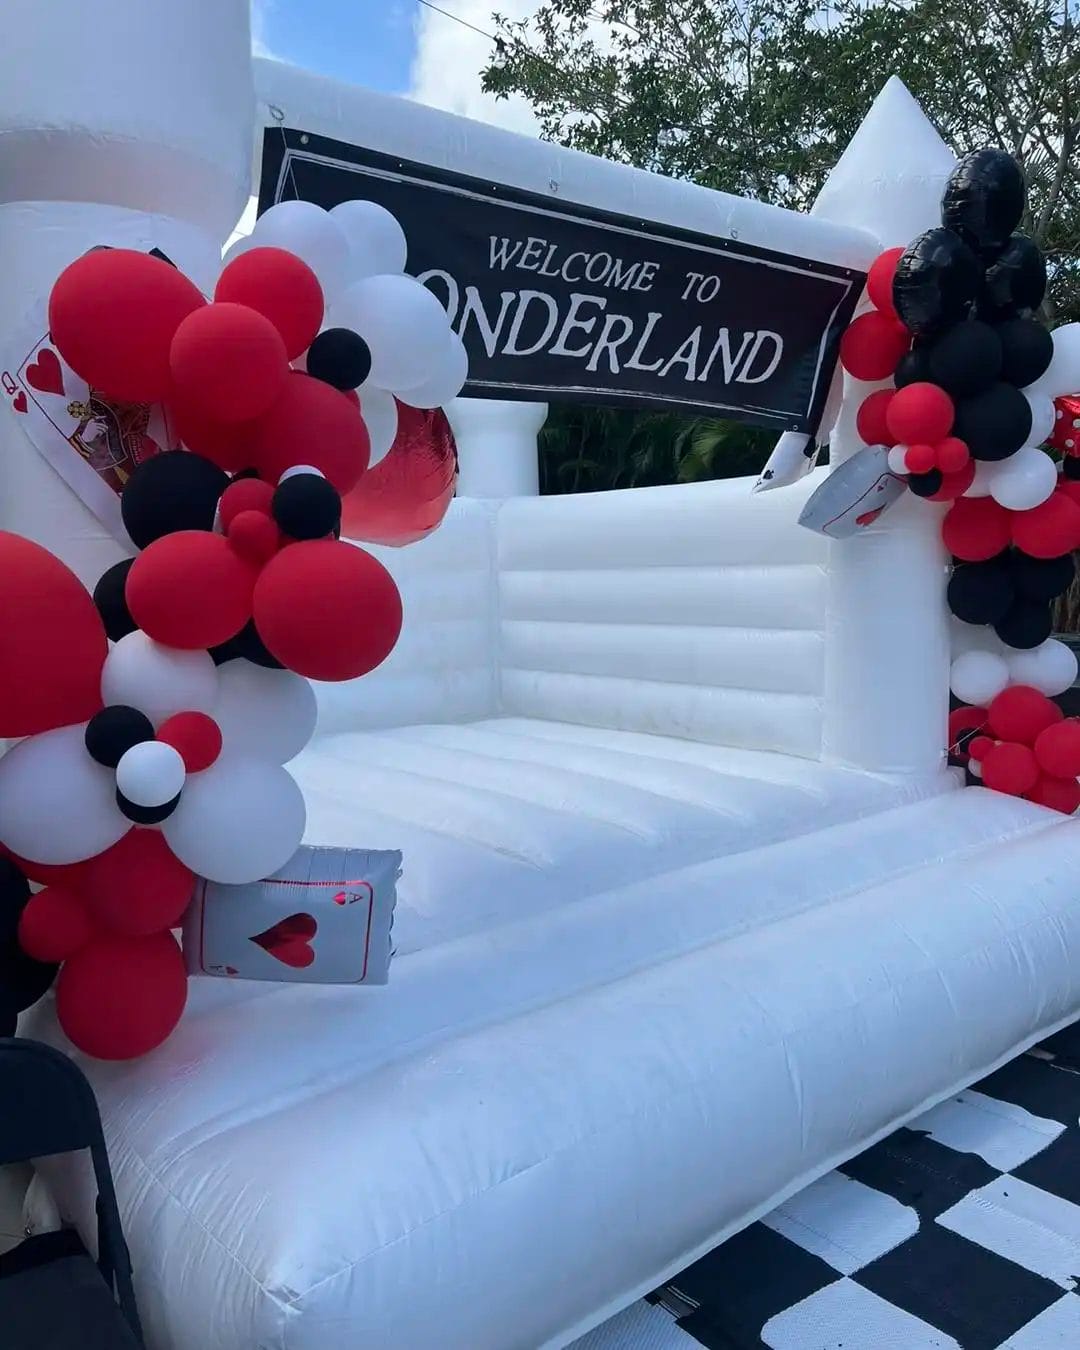 Inflatable entrance designed with a "welcome to wonderland" banner, decorated with red, black, and white balloons, featuring playing card elements.